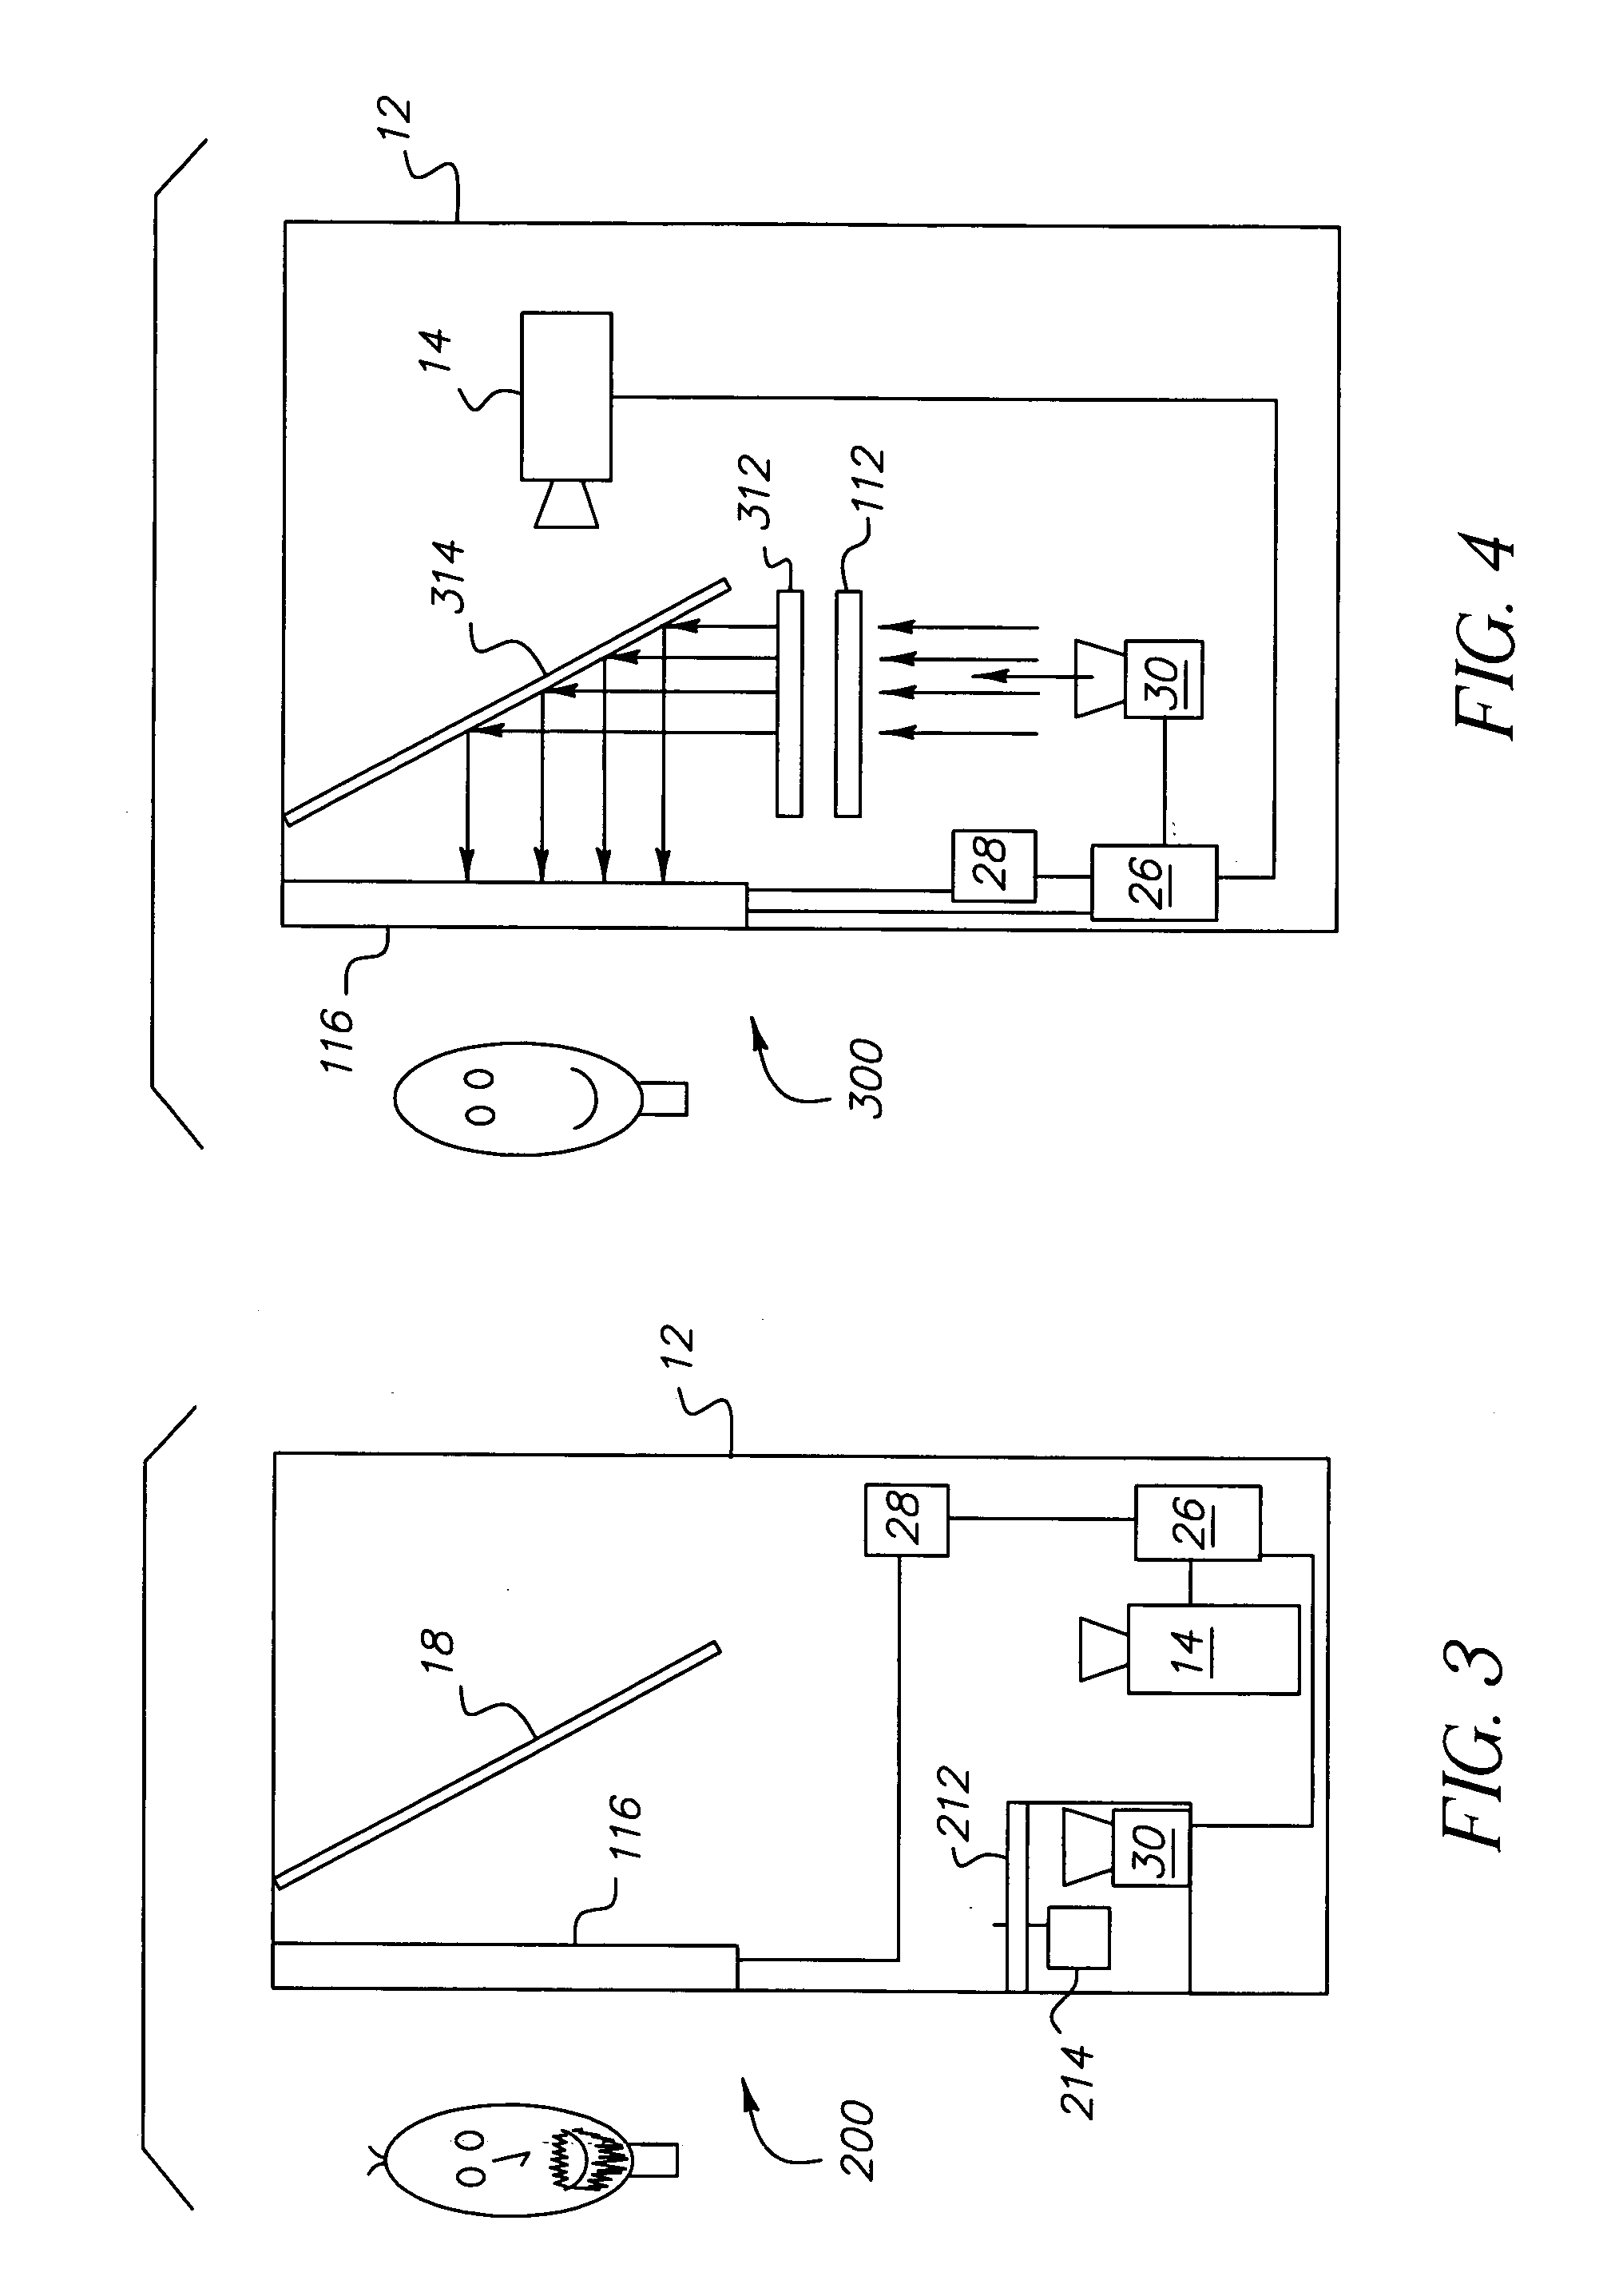 Image capture and display device